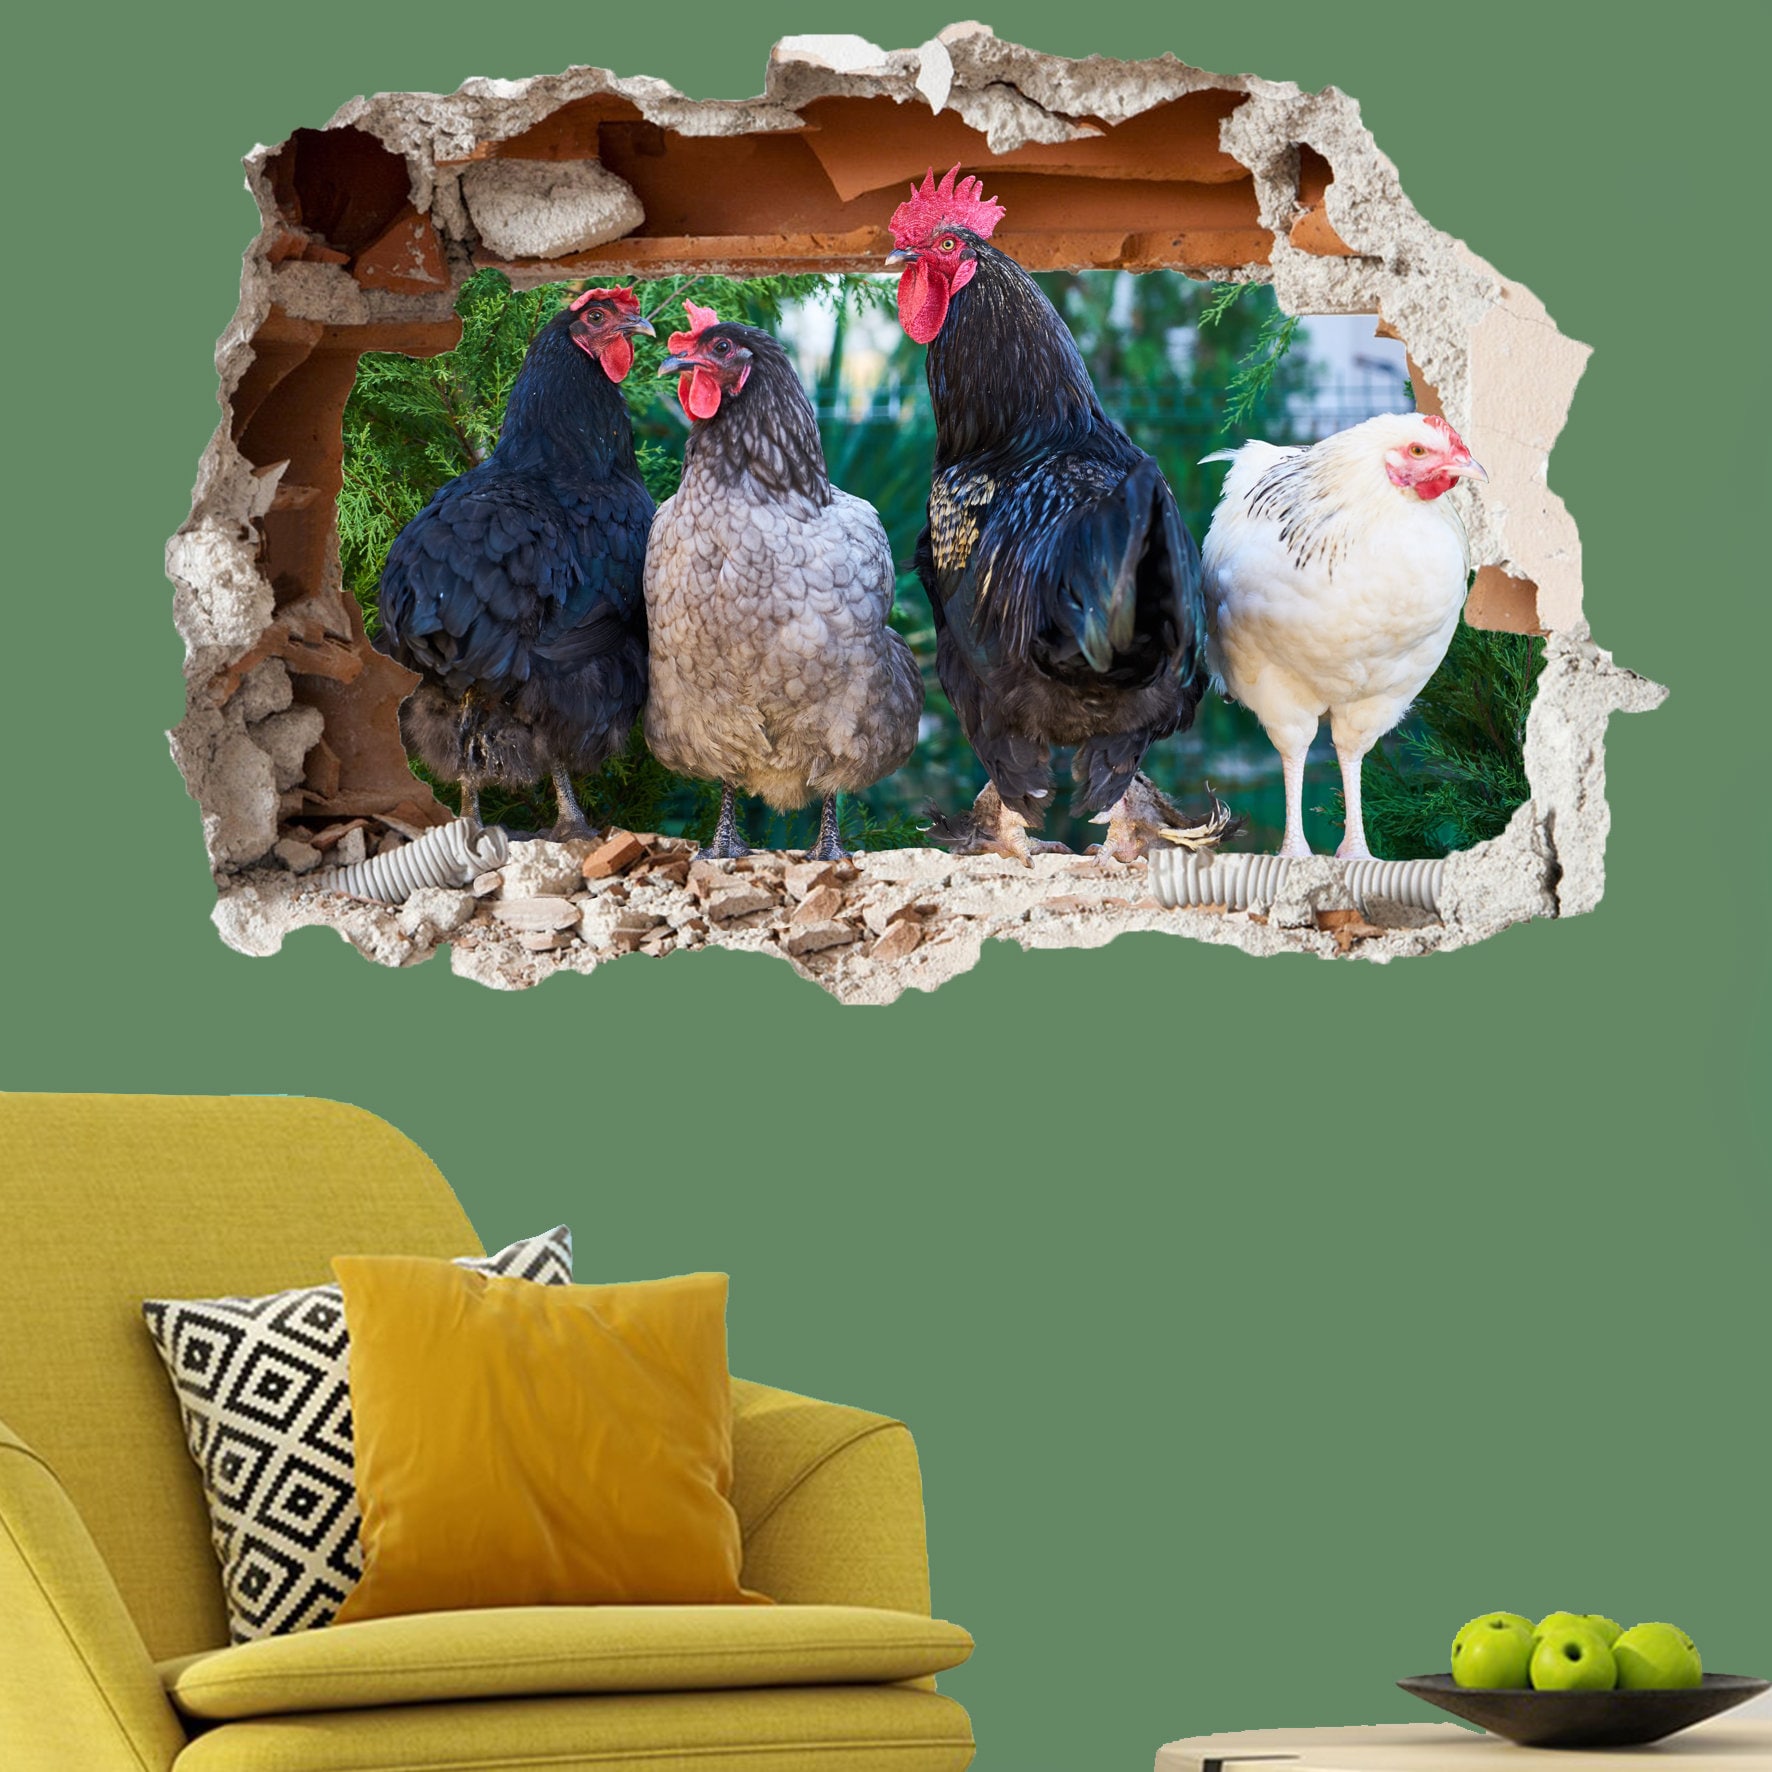 Wall Stickers Farm Chickens Hens Field Smashed Decal 3D Art Hole Room S444 